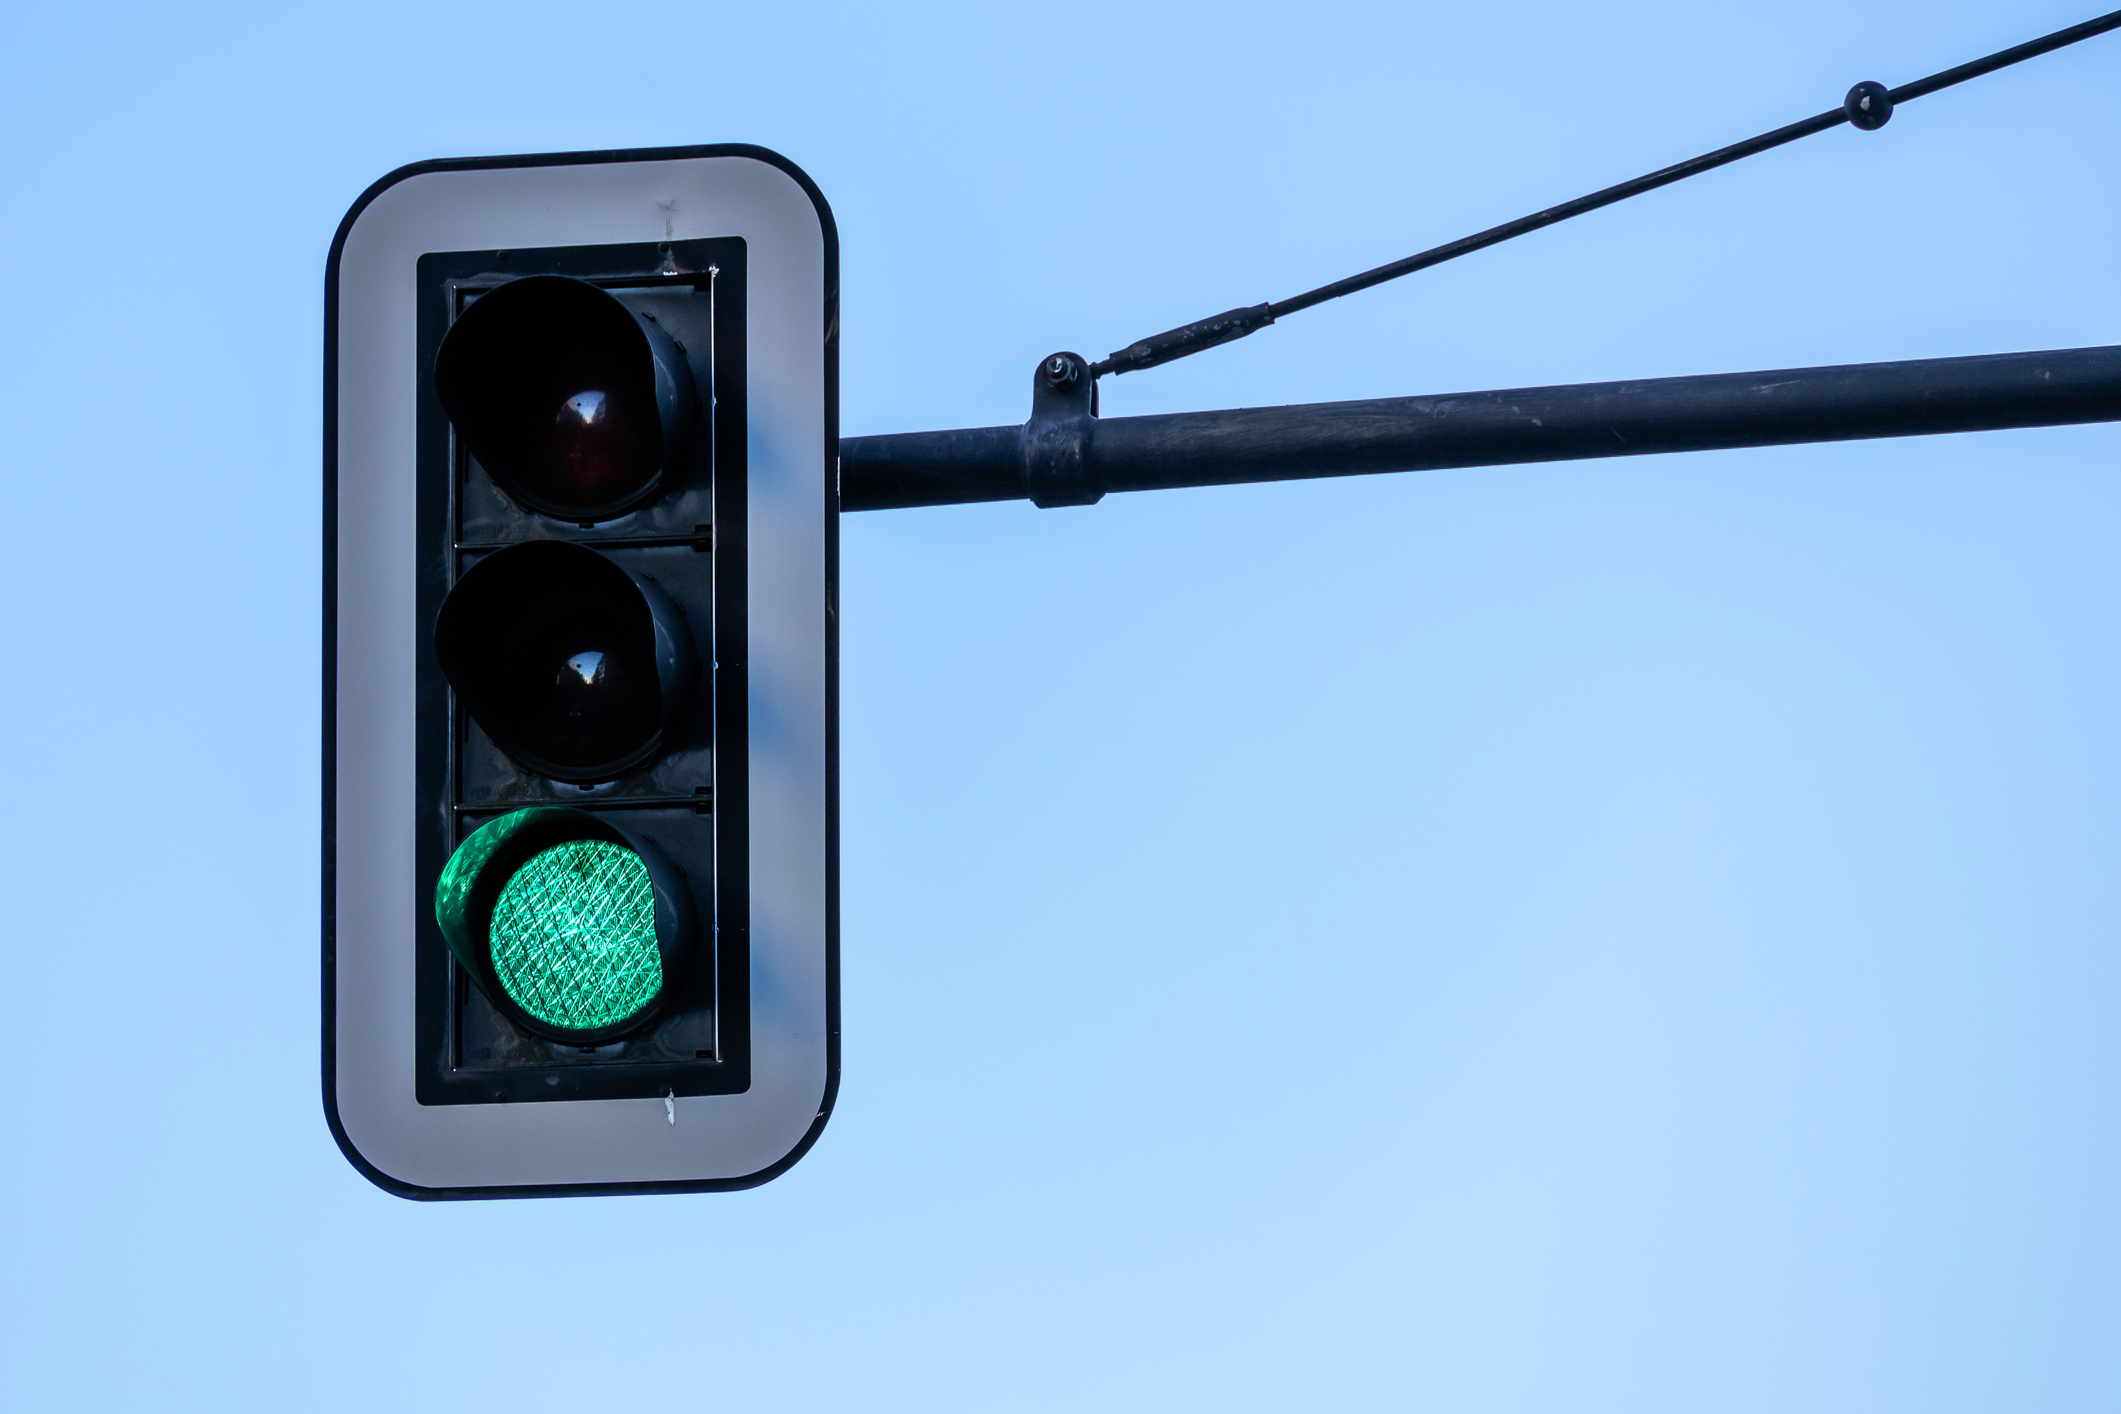 Traffic light against a clear sky with the green light illuminated